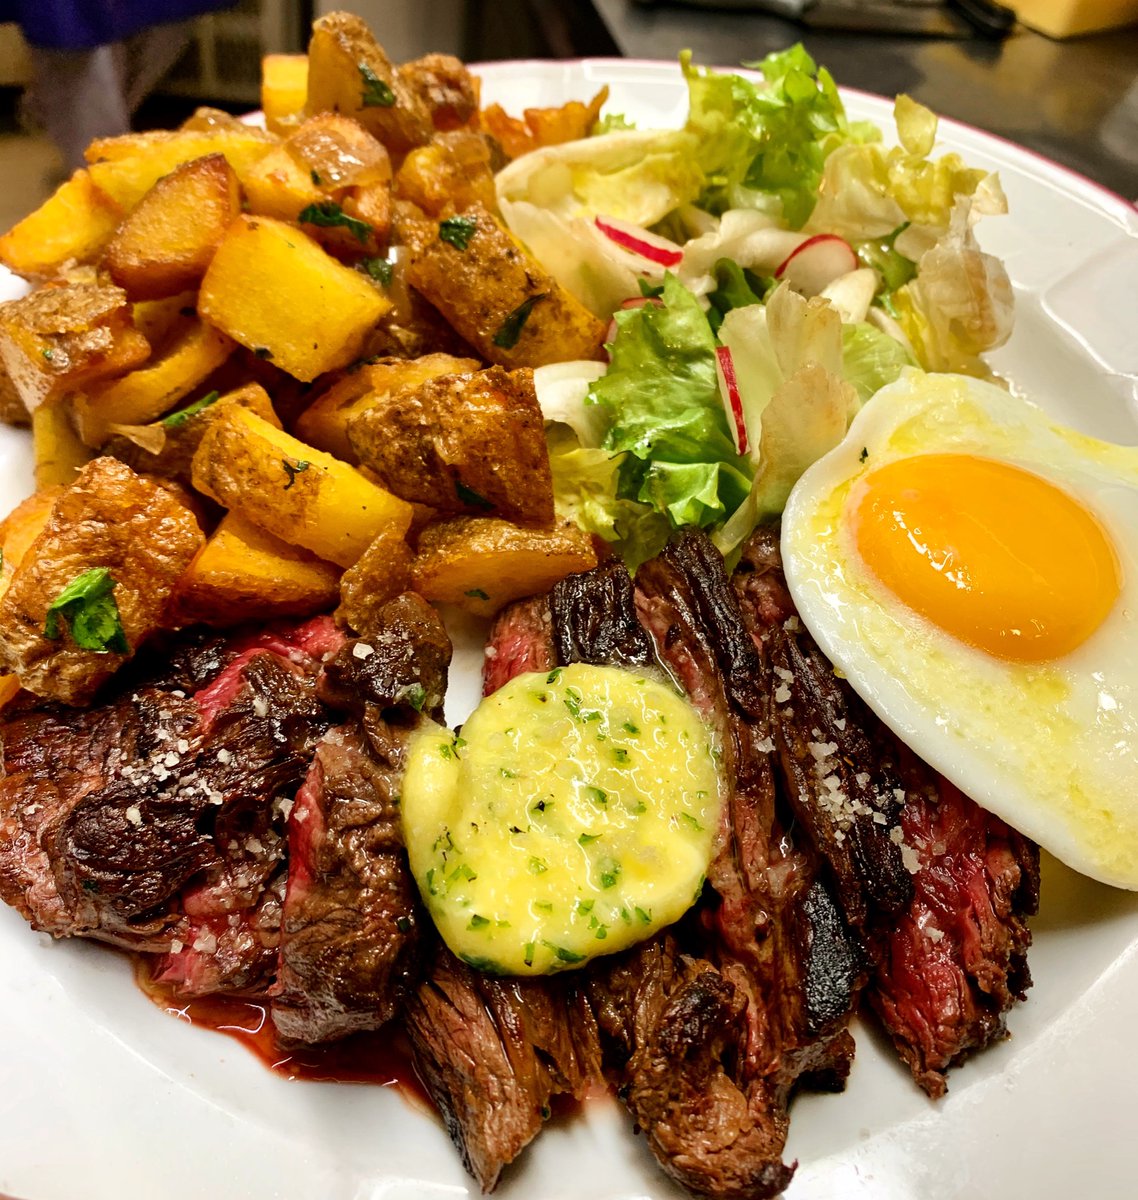 Who’s in for Irish skirt steak and eggs tomorrow? 🥩 🍳 
Come in for Sunday brunch at The Green Goose, from 12h-16h! #paris11 #sundaybrunch #brunchdimanche #steakandeggs